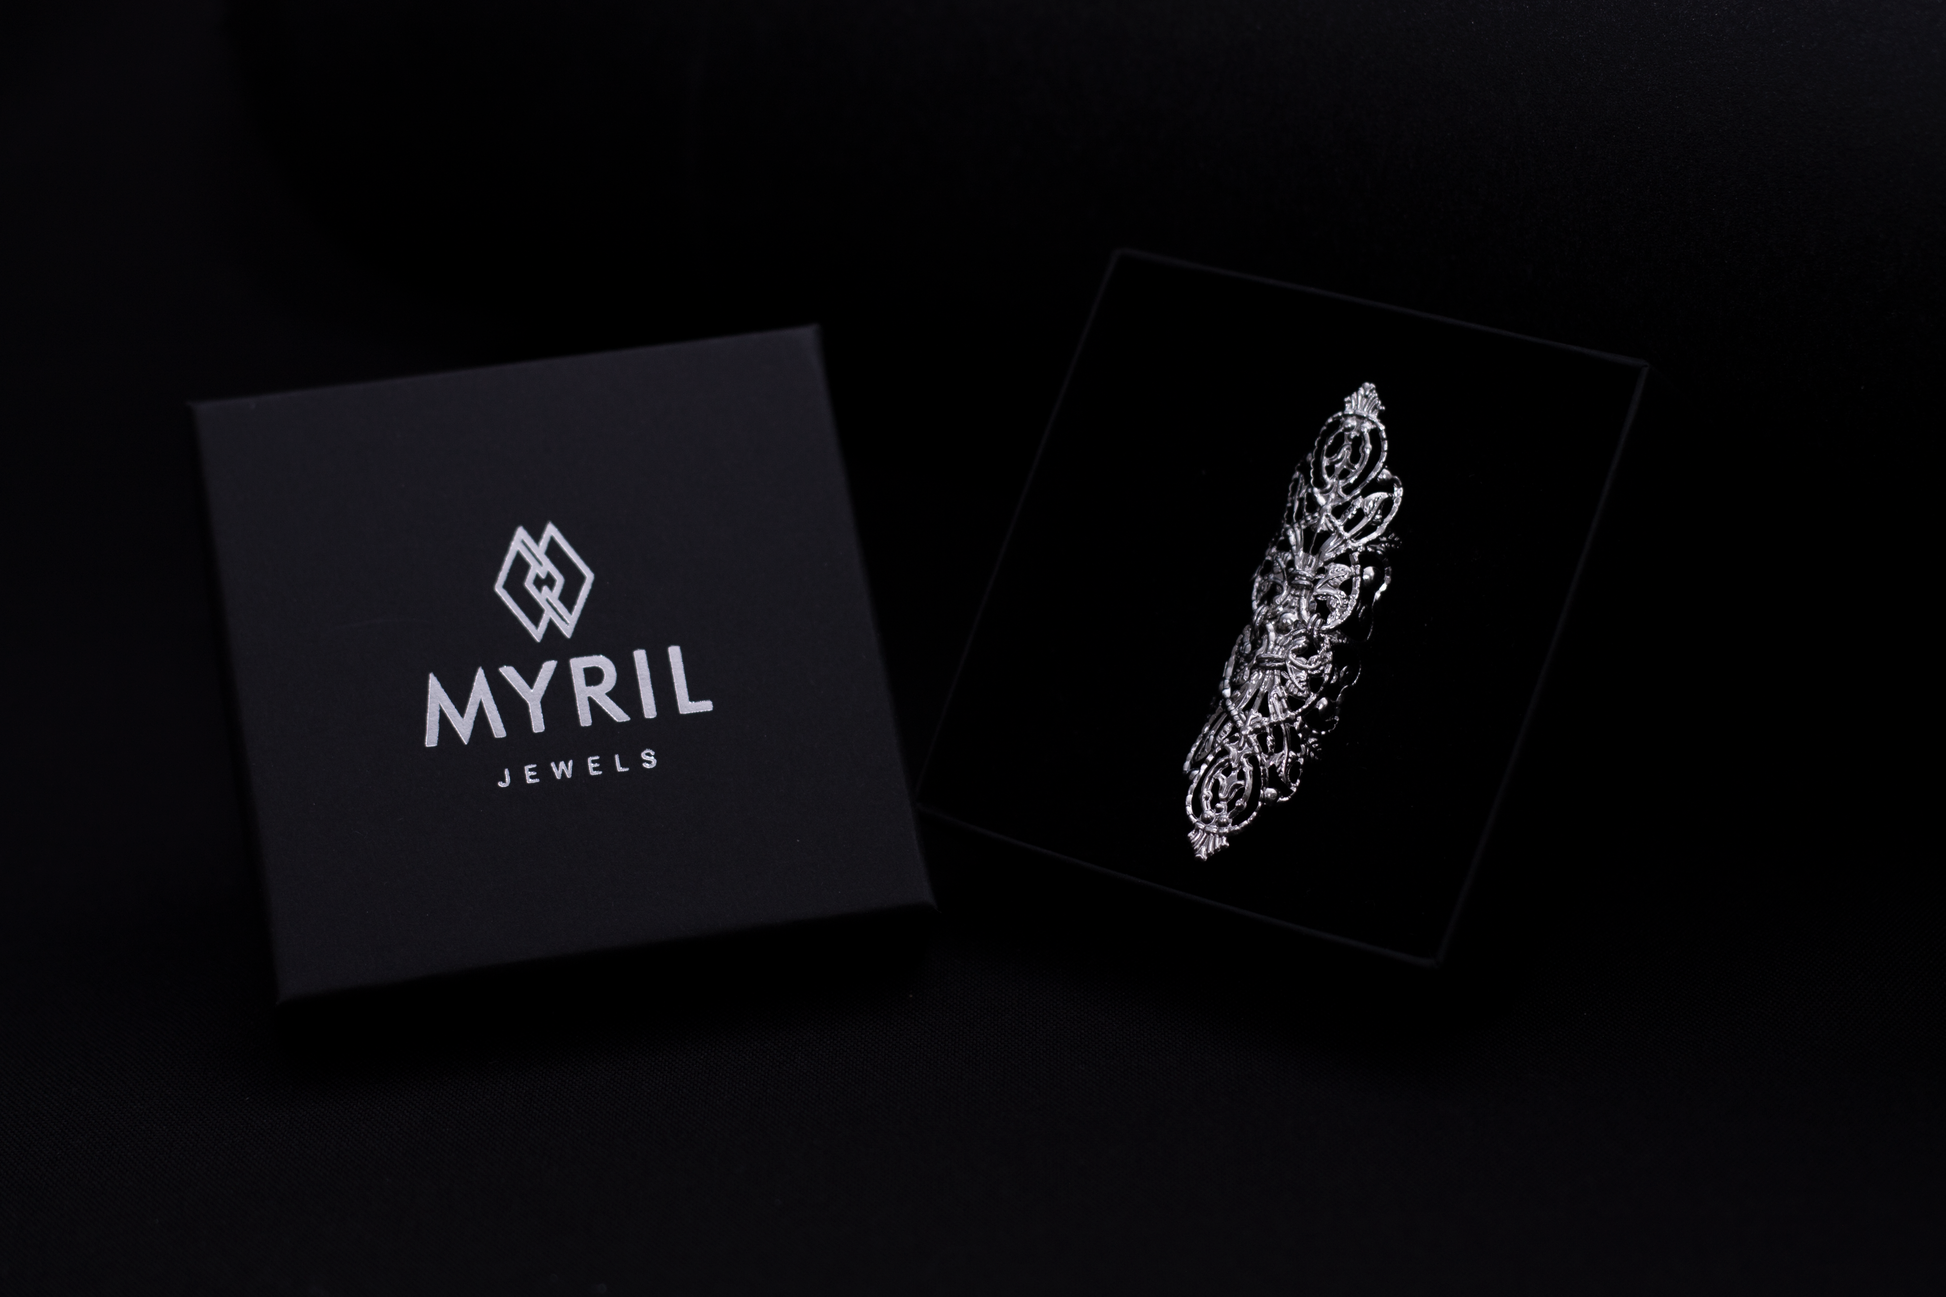 Dramatic wide gothic ring by Myril Jewels presented in its packaging with the brand's logo for a distinct dark-avantgarde appeal. This neo-gothic masterpiece, ideal for Halloween or as a punk fashion statement, exudes gothic-chic and whimsigoth style, perfect for a goth girlfriend gift or bold everyday wear.